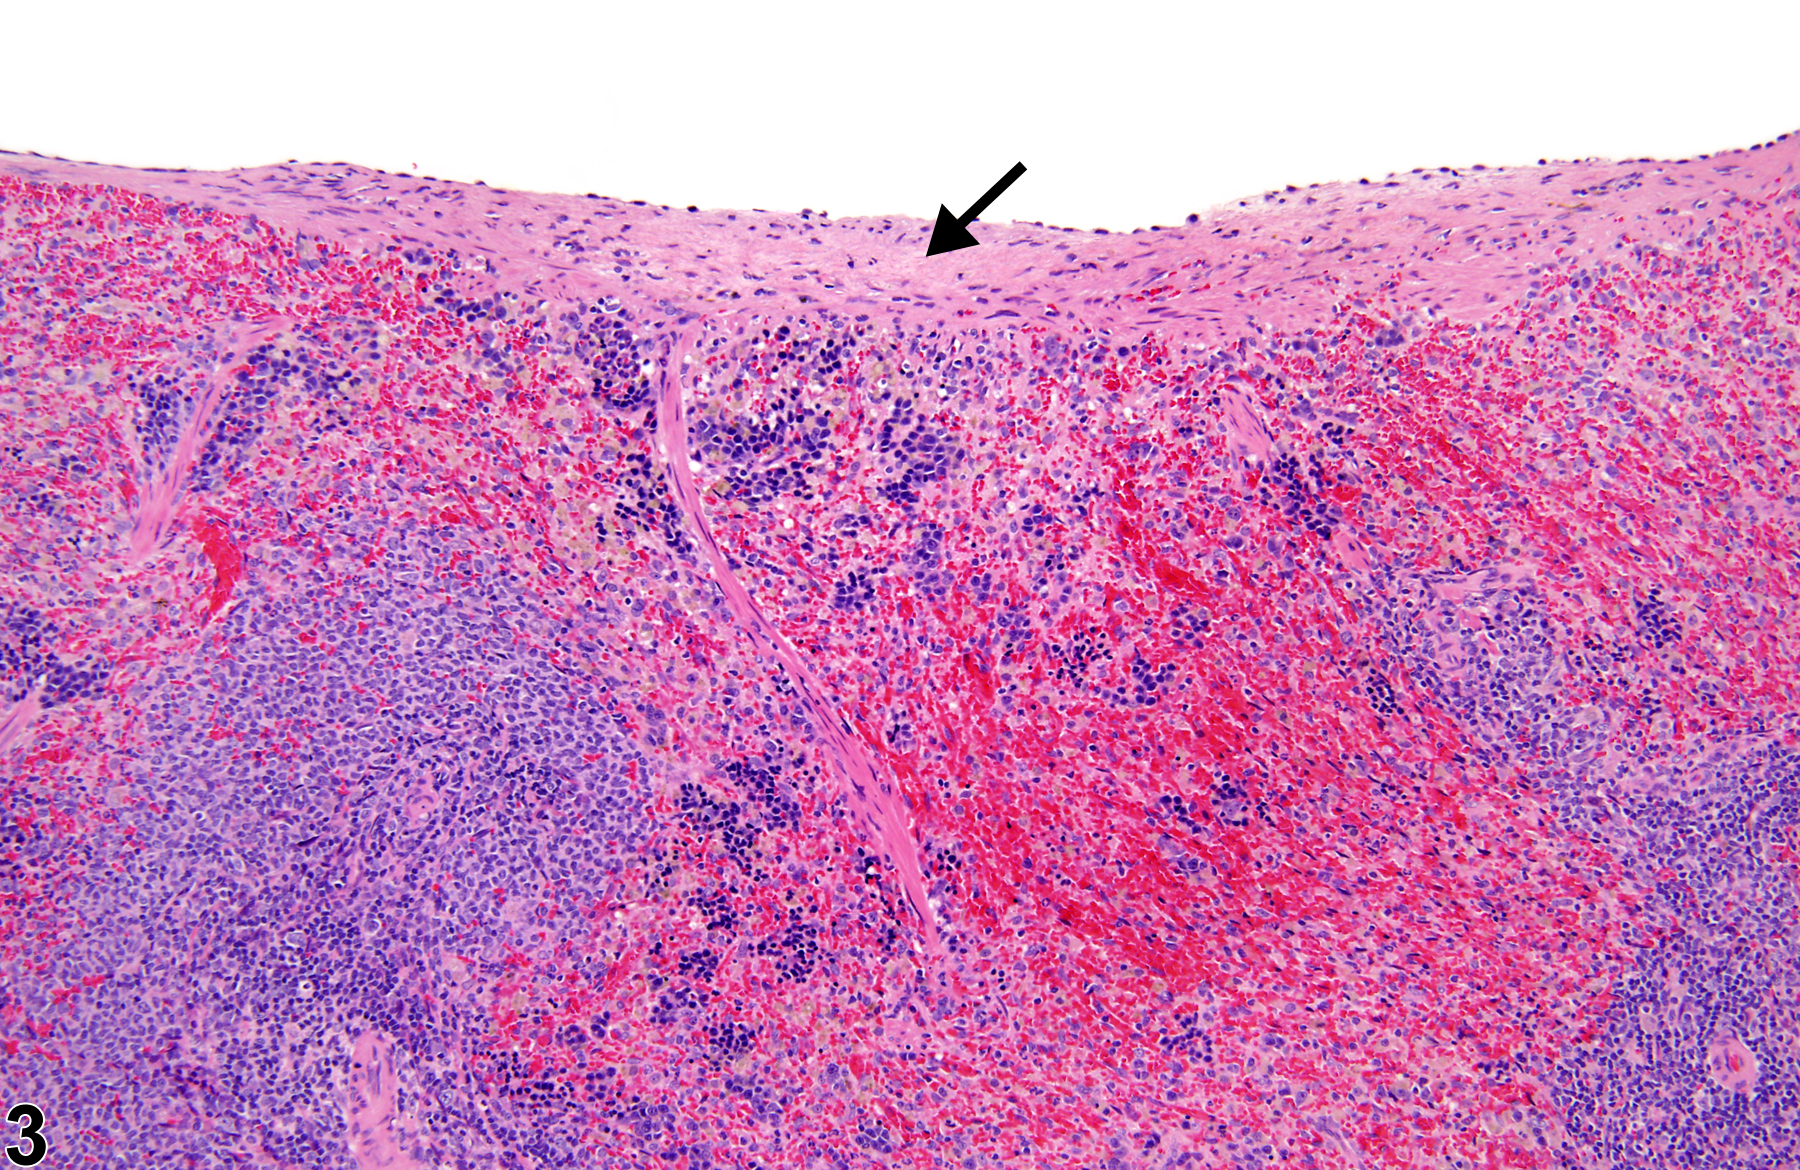 Image of fibrosis in the spleen from a male F344/N rat in a chronic study